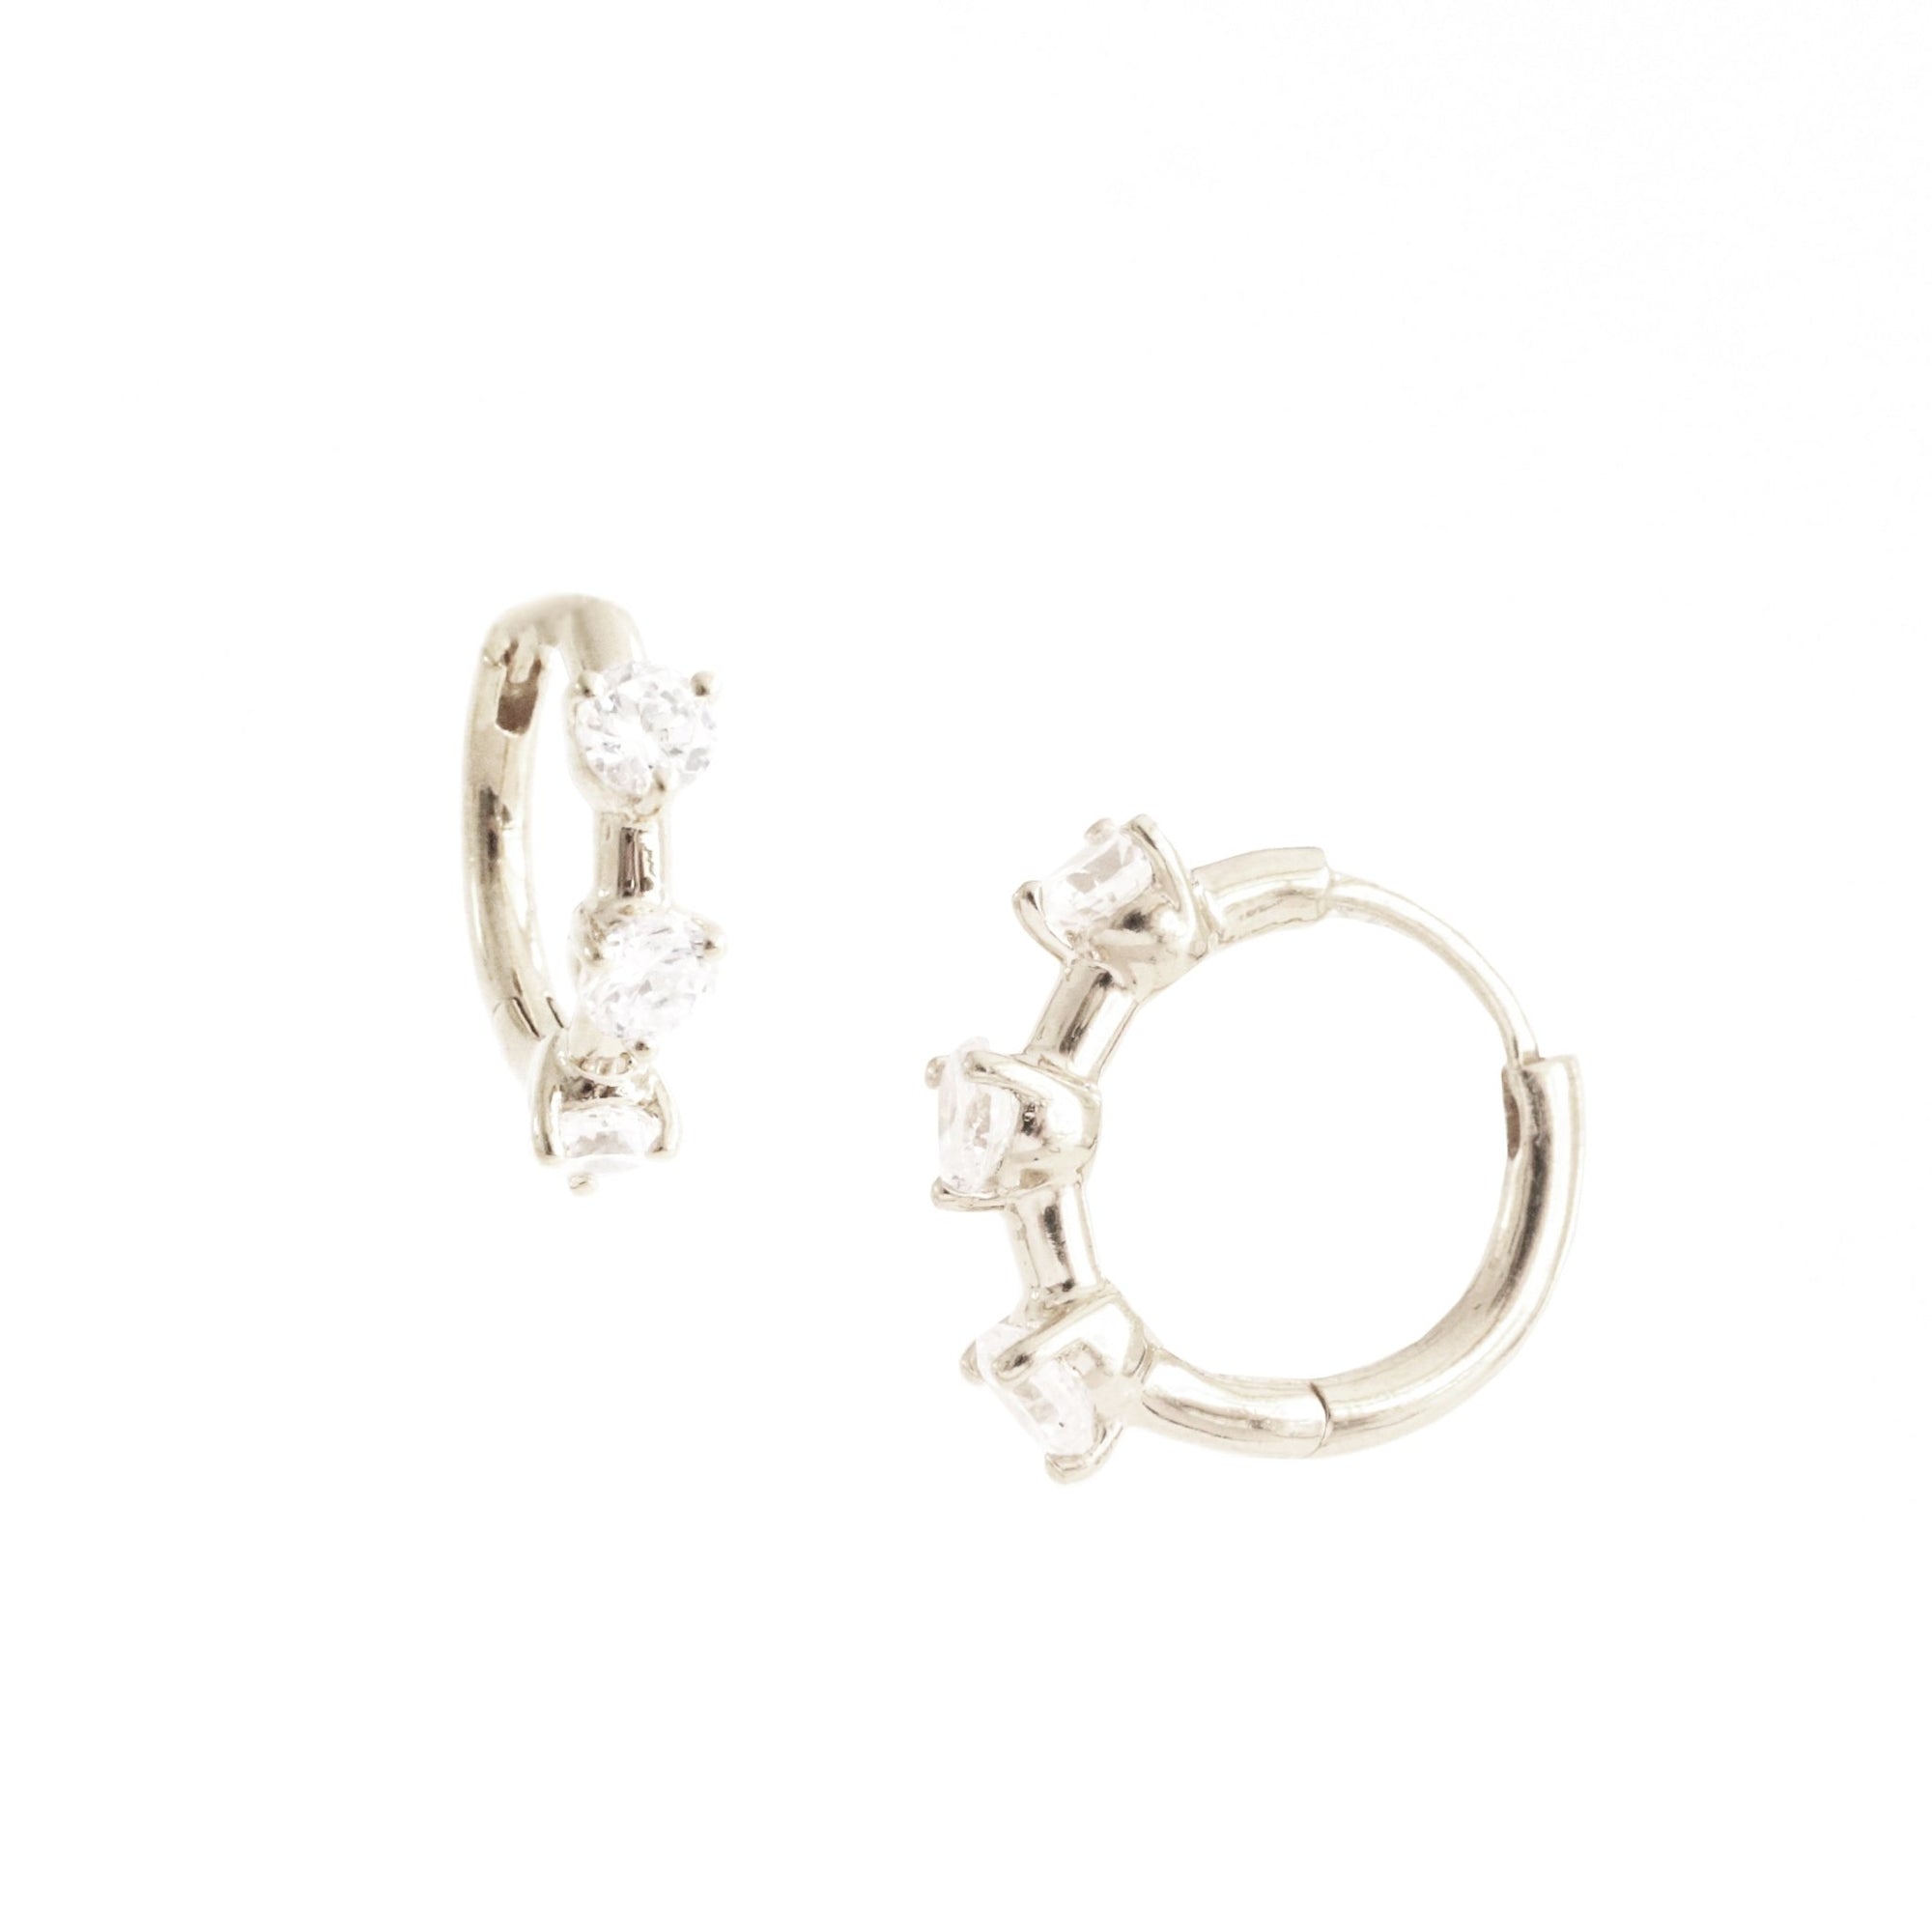 SCATTERED LOVE HUGGIE HOOPS - CUBIC ZIRCONIA & SILVER - SO PRETTY CARA COTTER